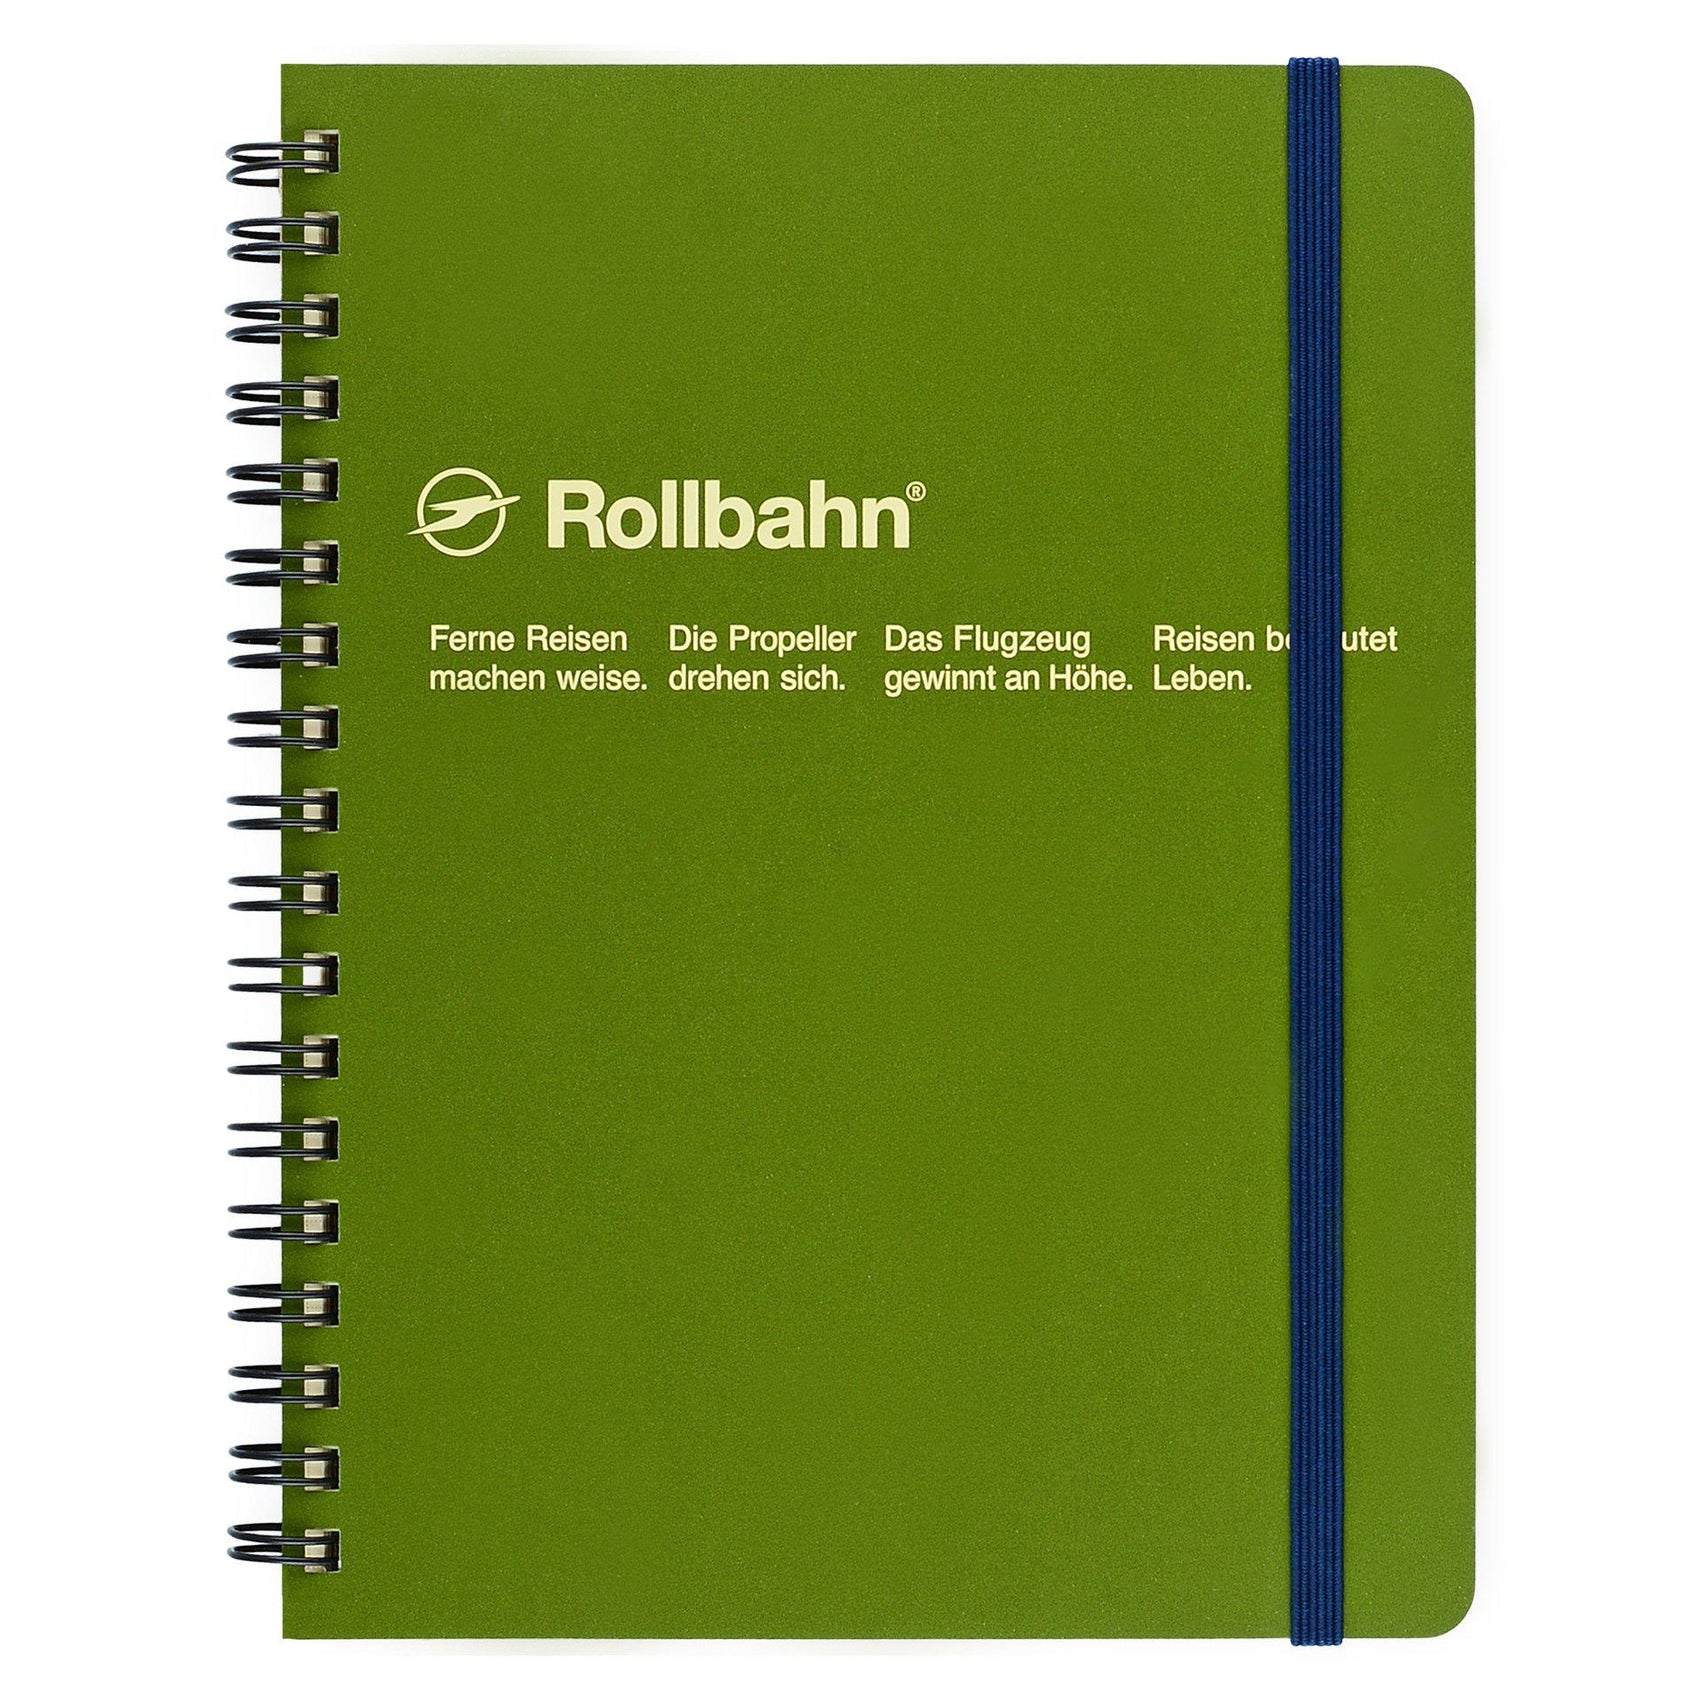 Rollbahn Notebook Small, Large Or A5 | 9 Colors